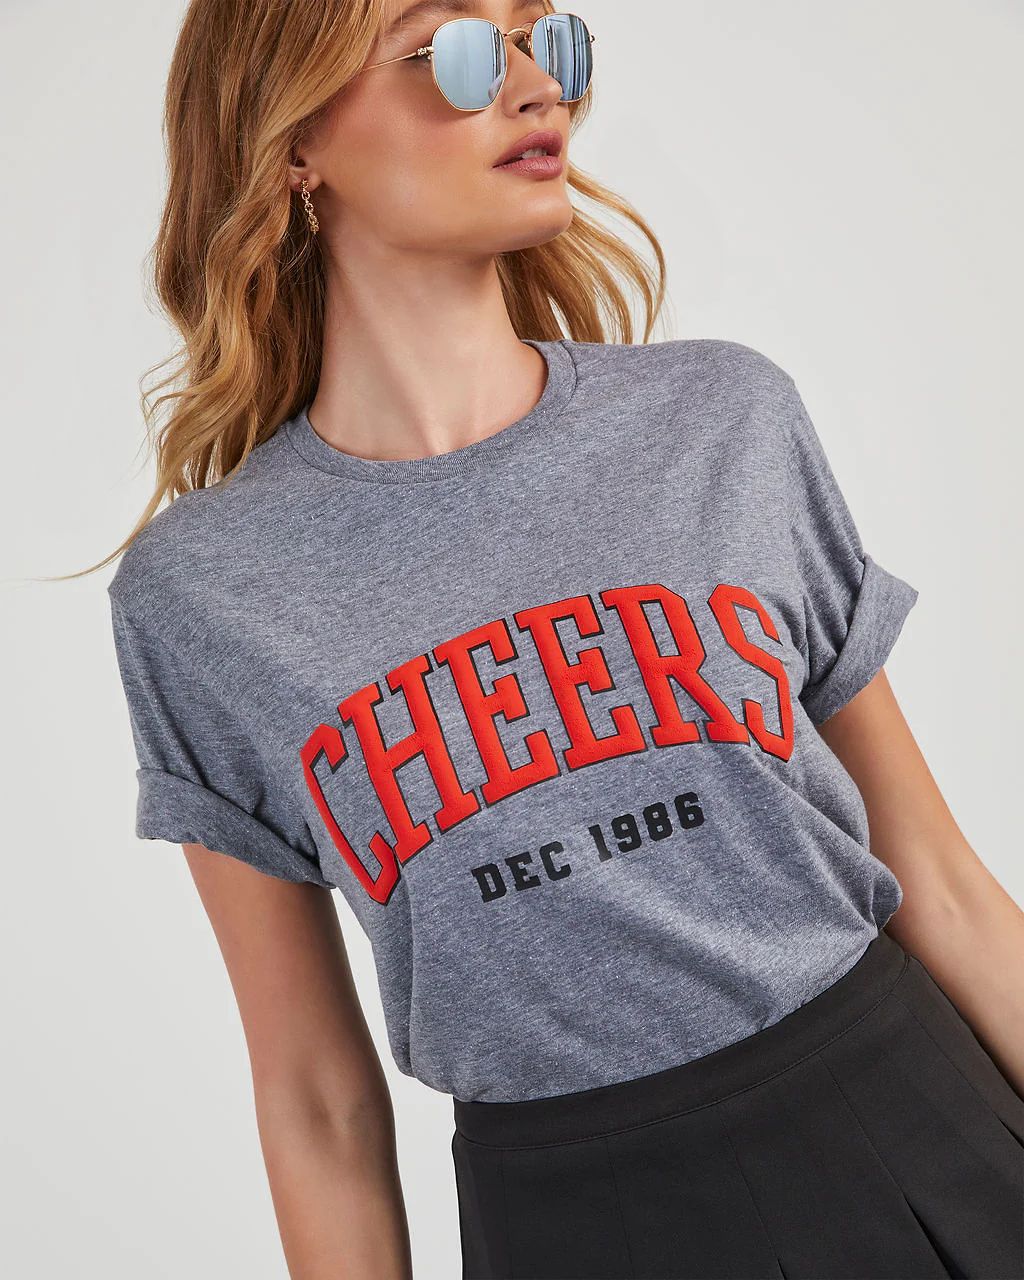 Cheers Cotton Graphic Tee | VICI Collection